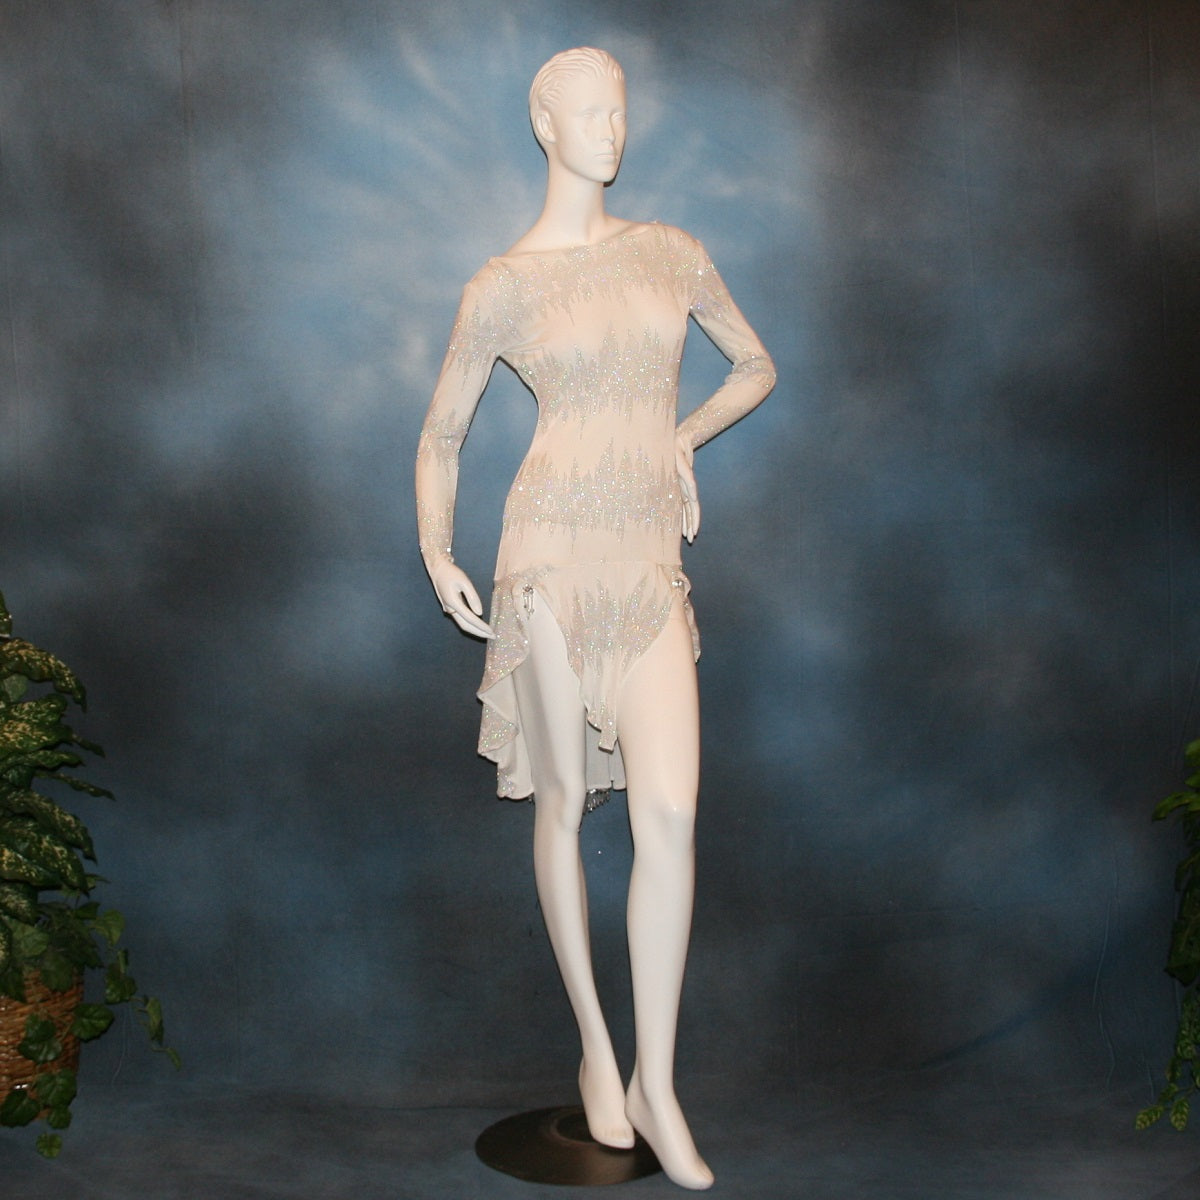 White Latin/Rhythm dress created in glitter slinky with an awesome electrifying glitter pattern, features long sleeves, lattice strap details on back & a touch of Swarovski hand beading in the skirting.